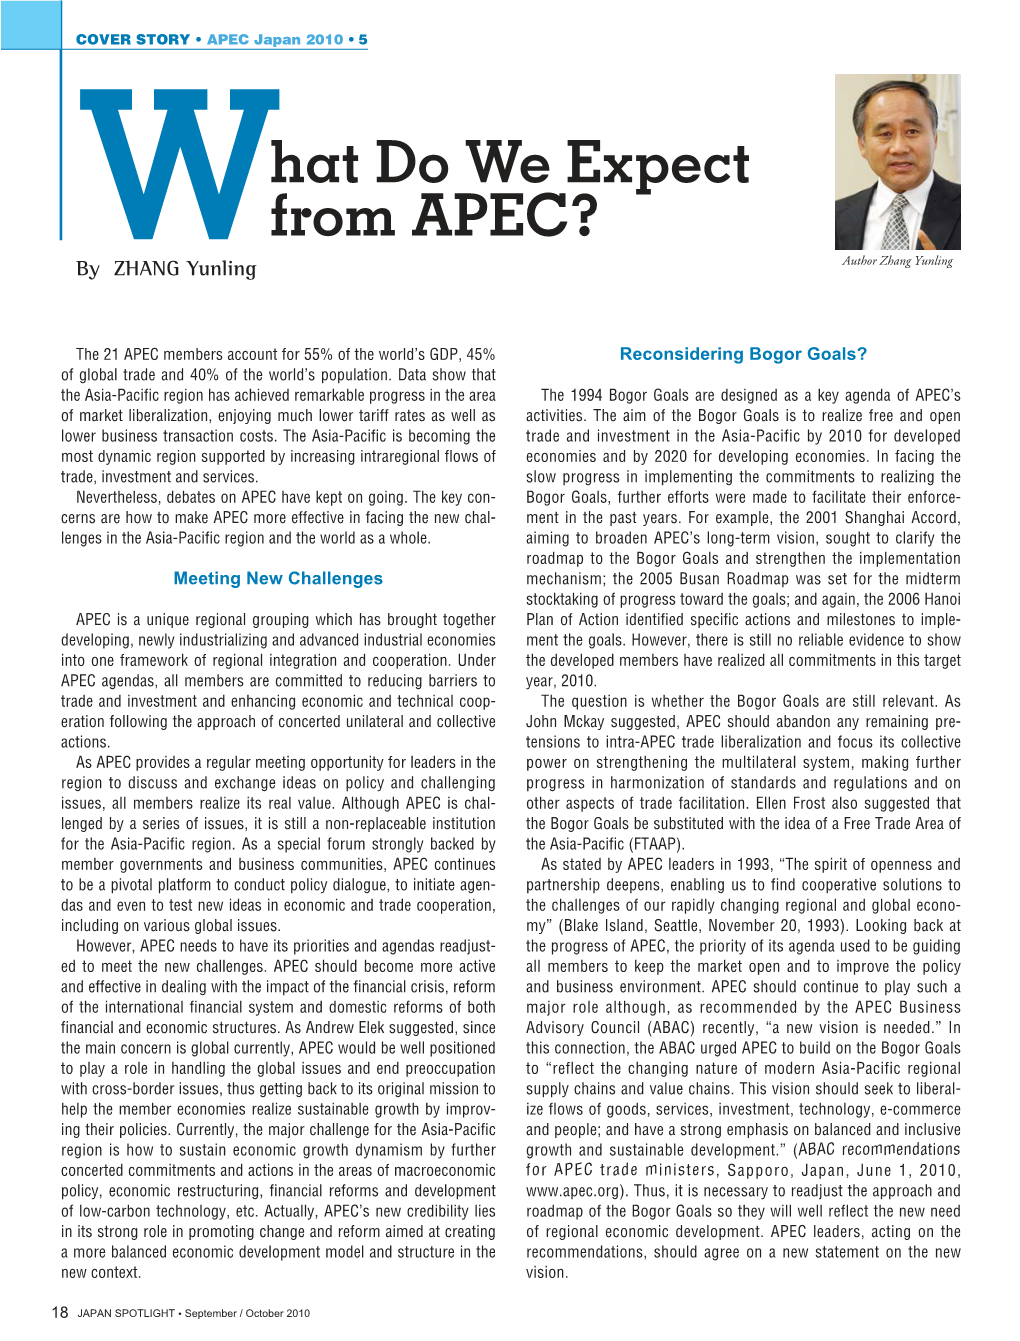 What Do We Expect from APEC?